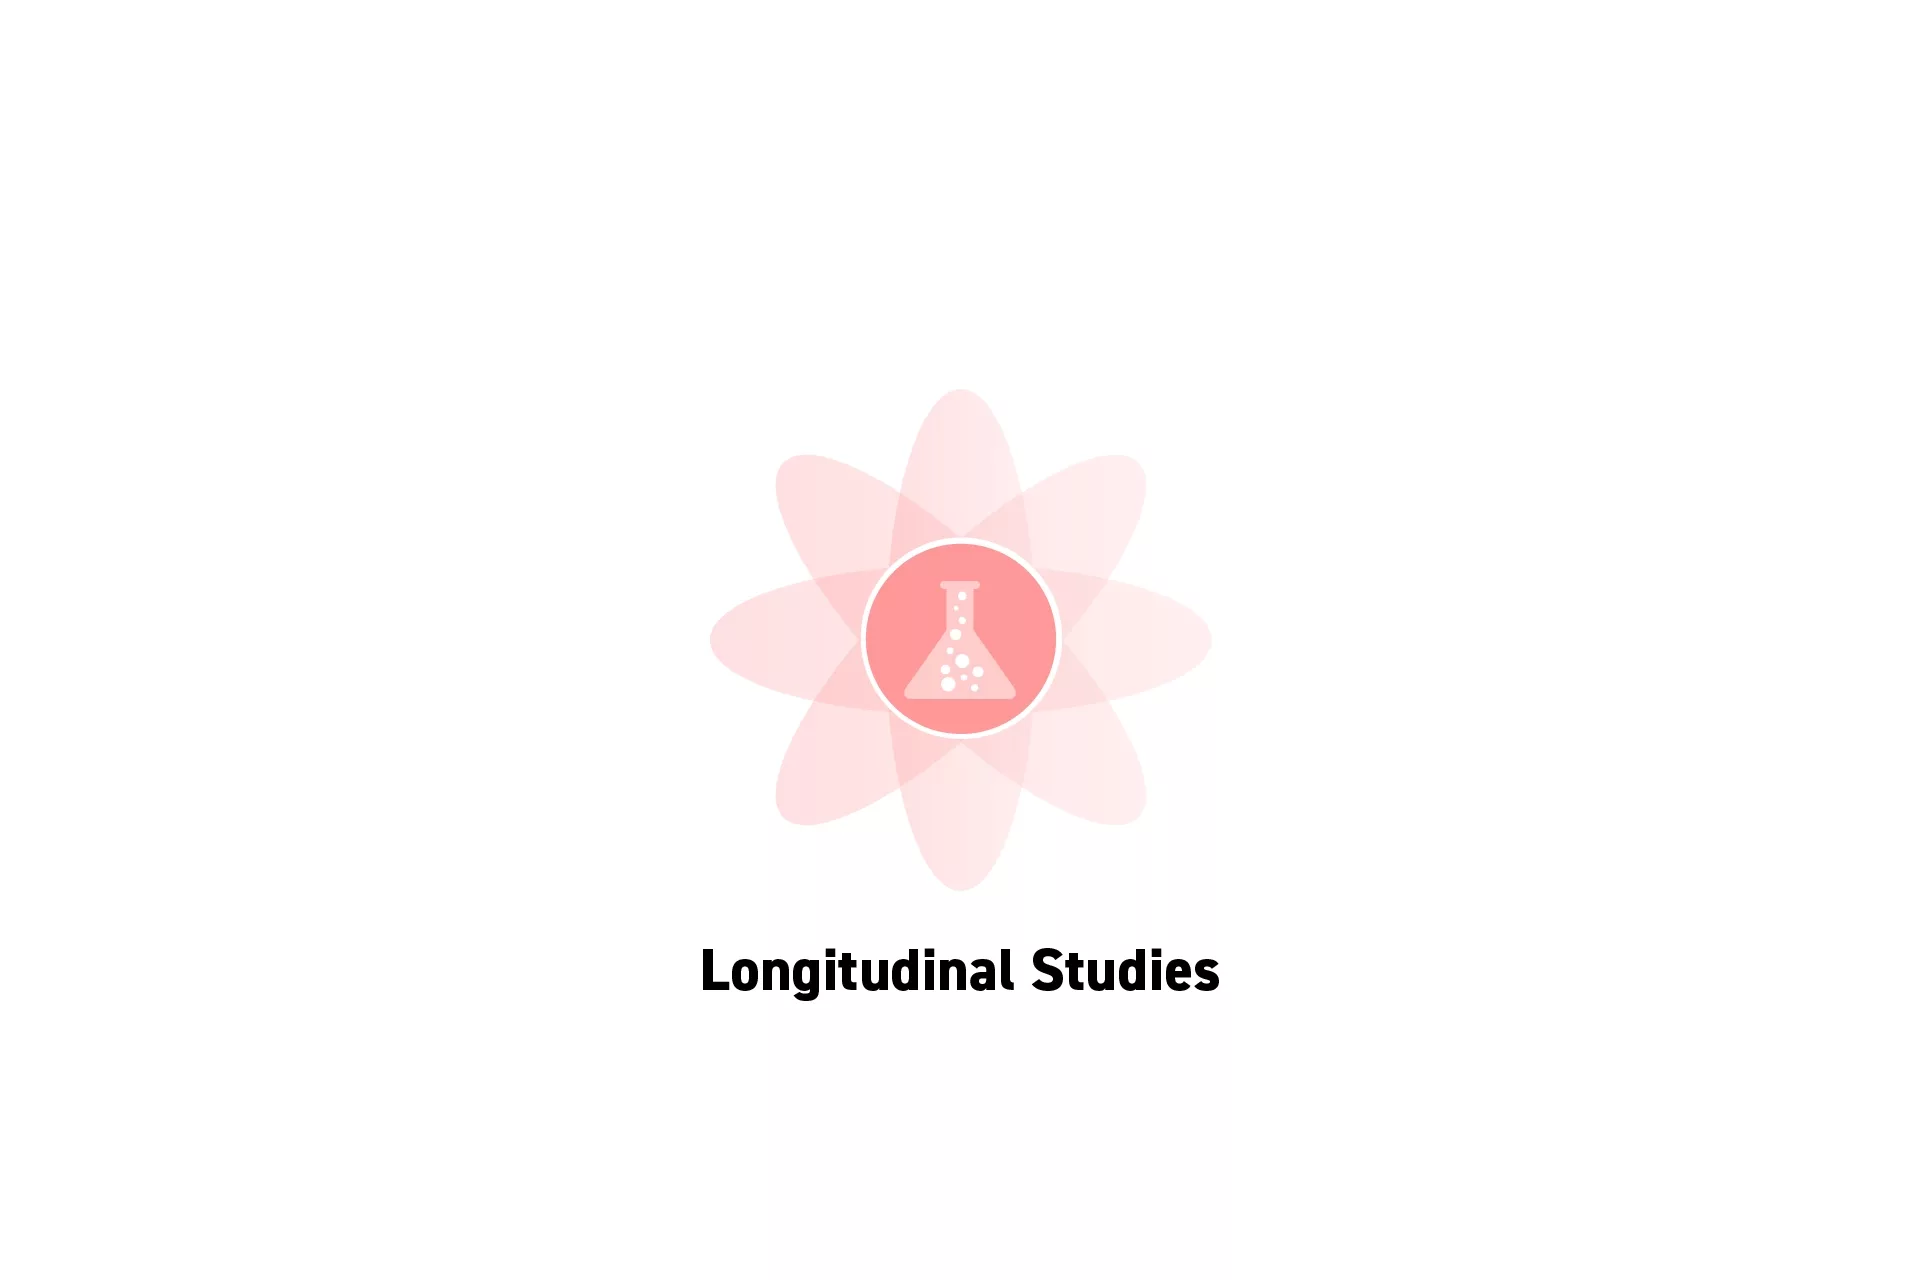 A flower that represents Strategy with the text “Longitudinal Studies” beneath it.